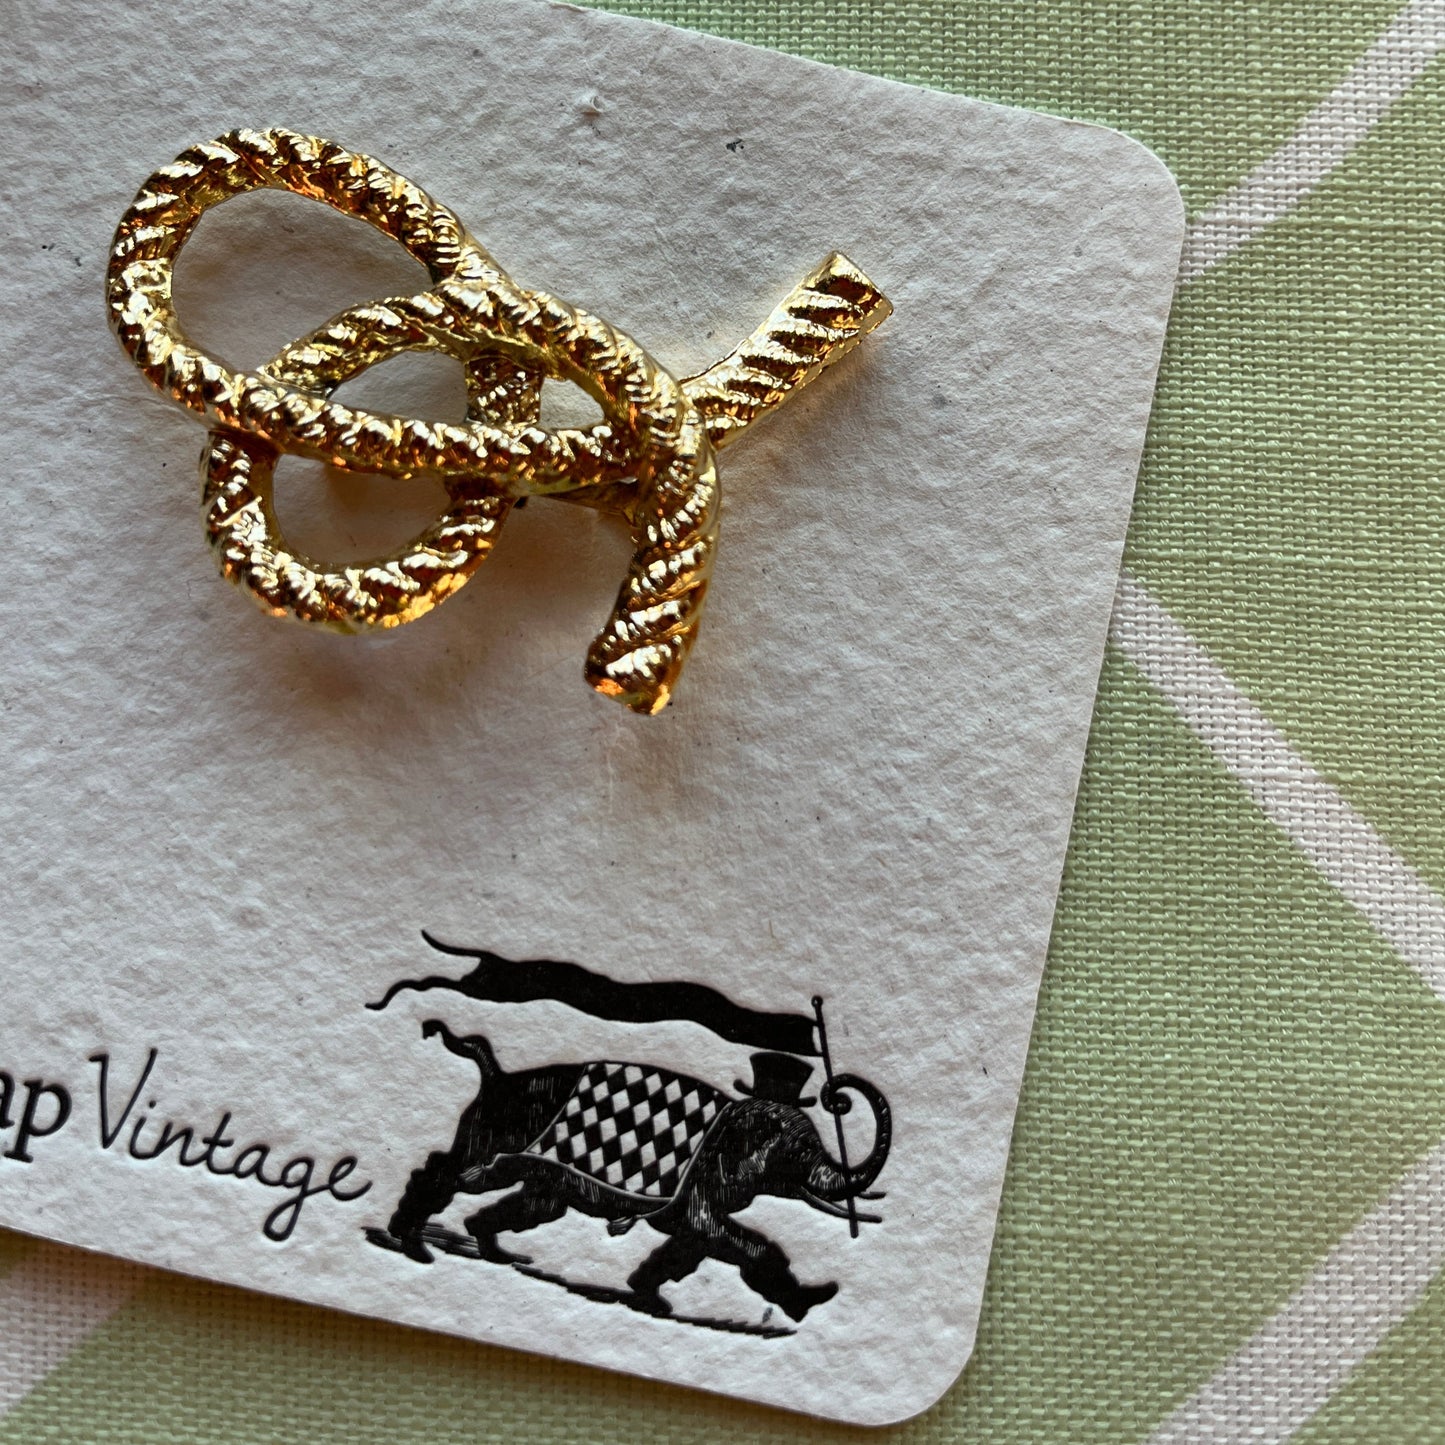 Vintage Gold-Hued Whale and Rope Pins, Set of 2